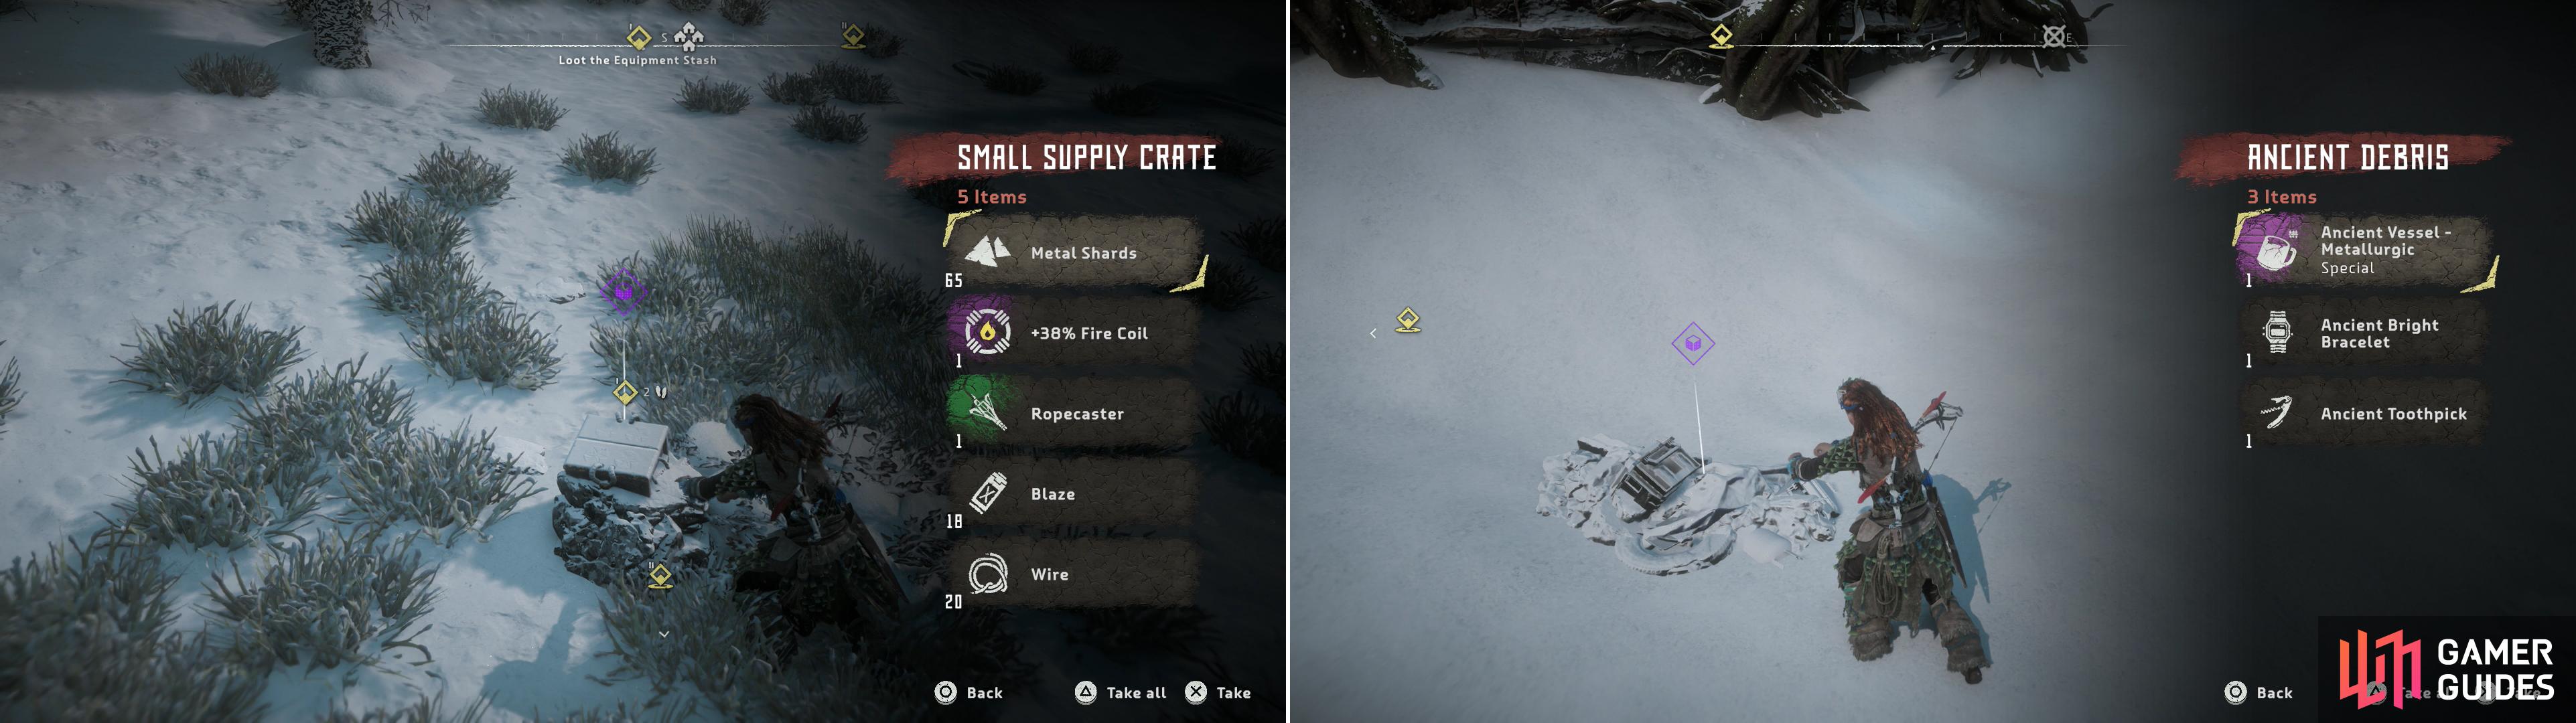 Search the supply cache left for you by your mysterious Focus-friend (left) then loot a pile of Ancient Debris to score the Ancient Vessel - Metallurgic (right).